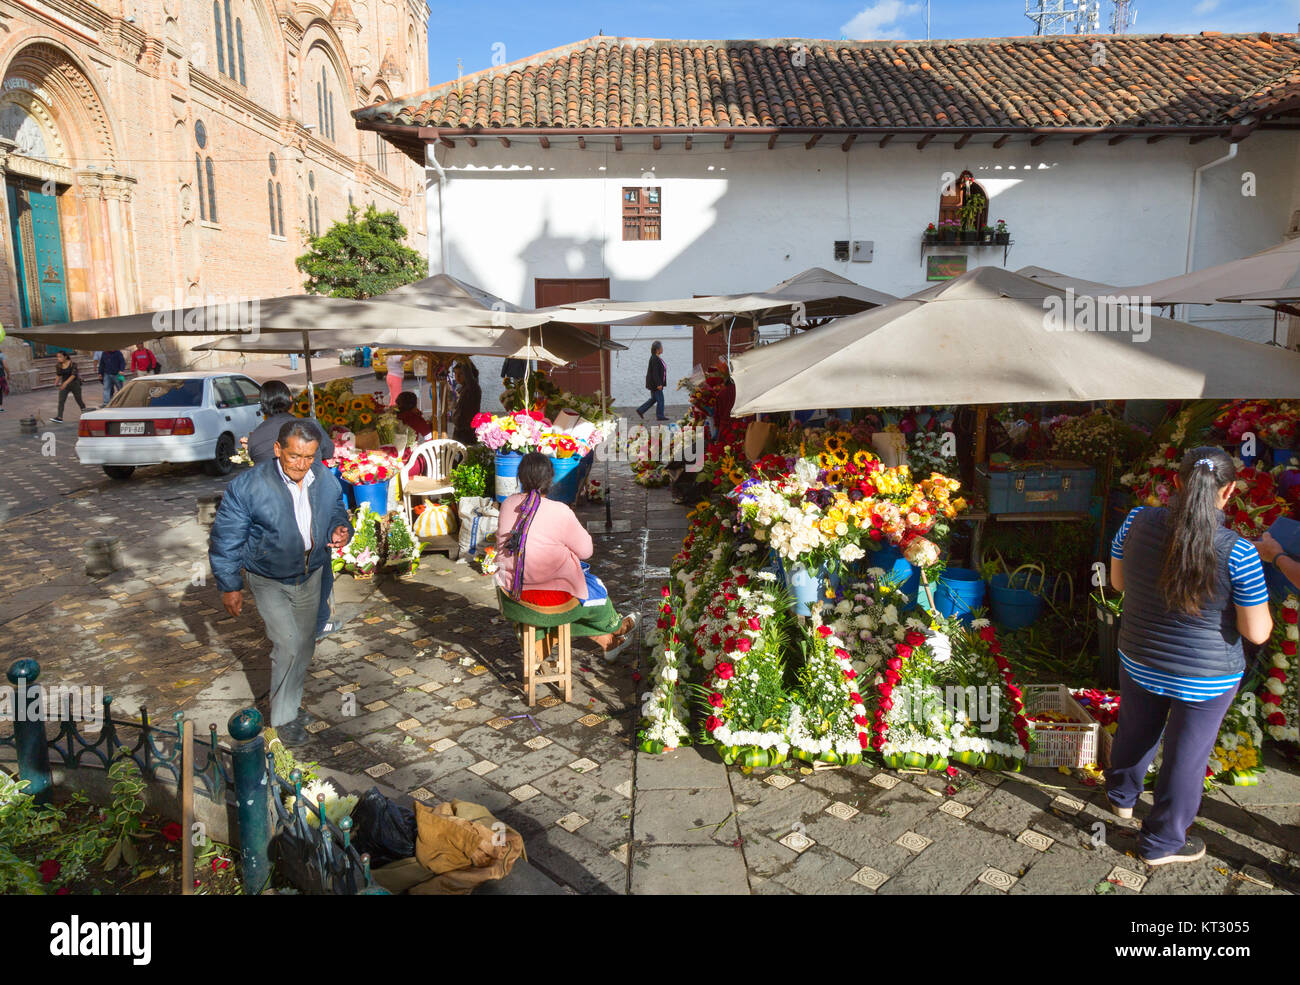 Cuenca Ecuador South America - stalls selling flowers at the flower market, Cuenca, UNESCO World Heritage site, Ecuador South America Stock Photo